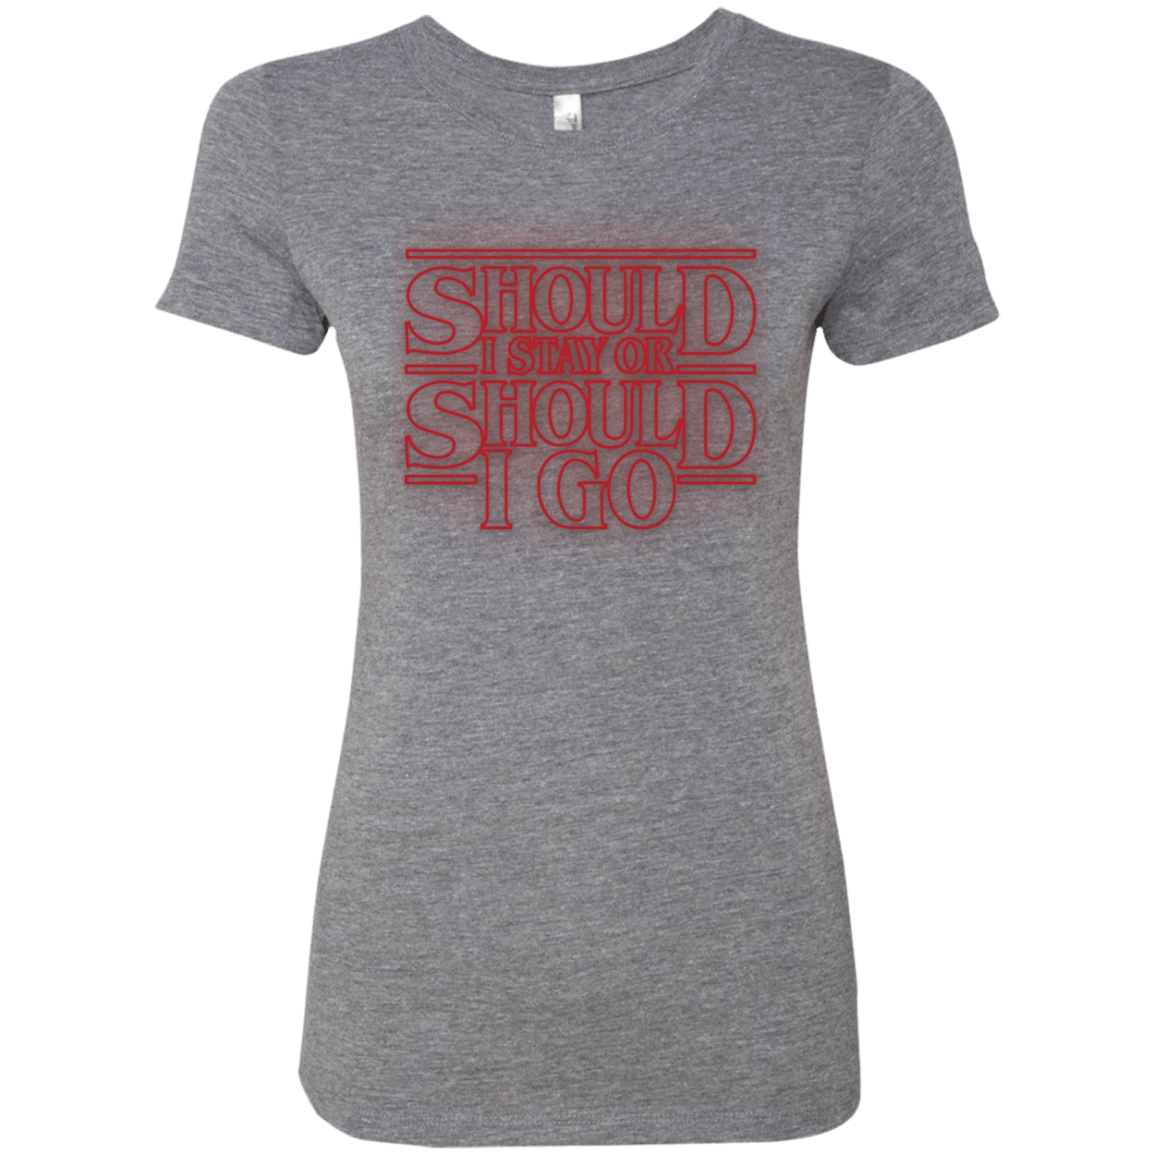 T-Shirts Premium Heather / Small Should I Stay Or Should I Go Women's Triblend T-Shirt